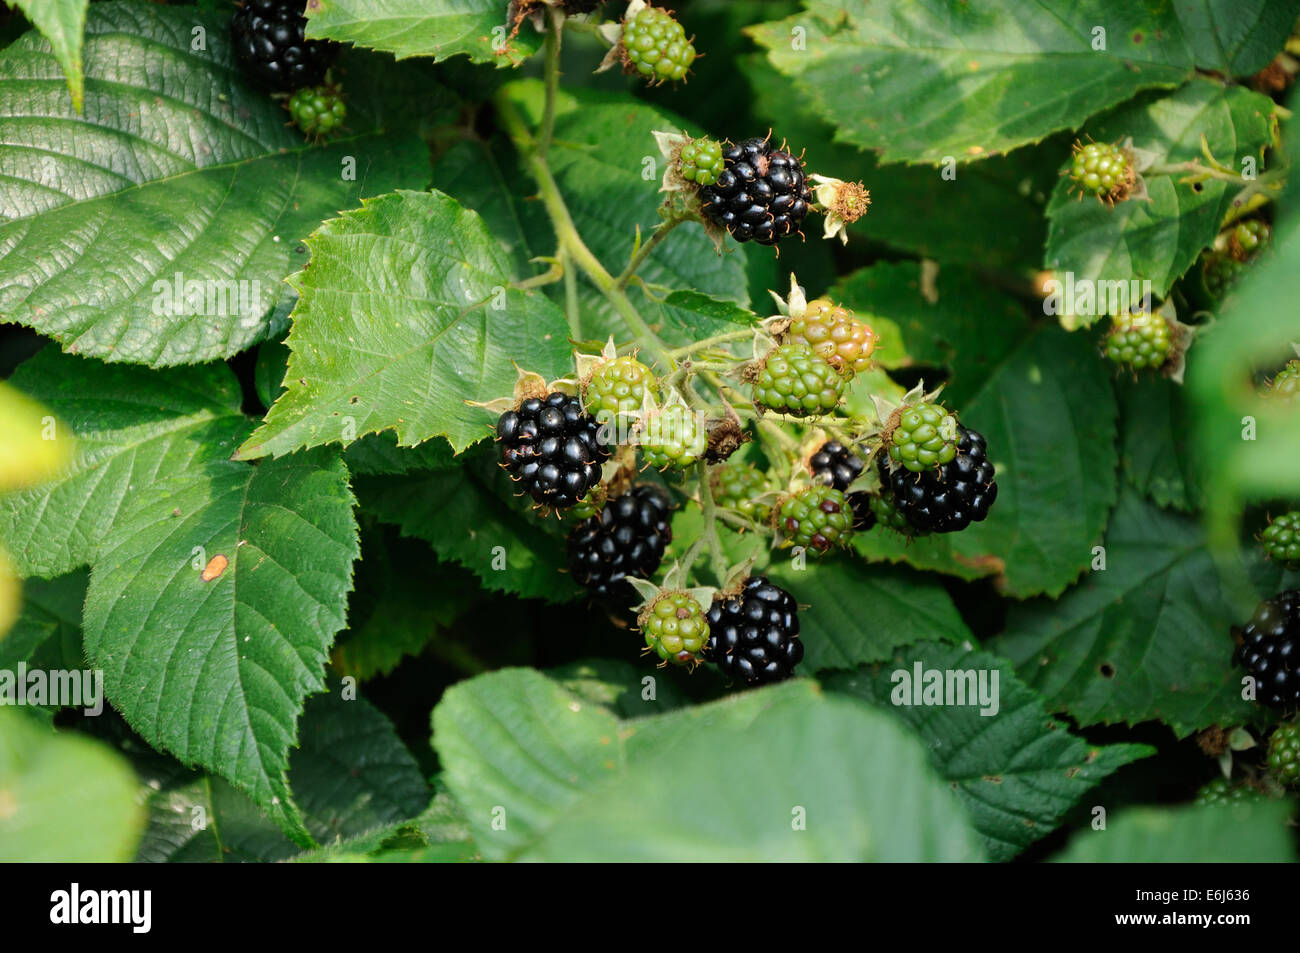 ripe and unripe berries of blackberry on the leaf Stock Photo